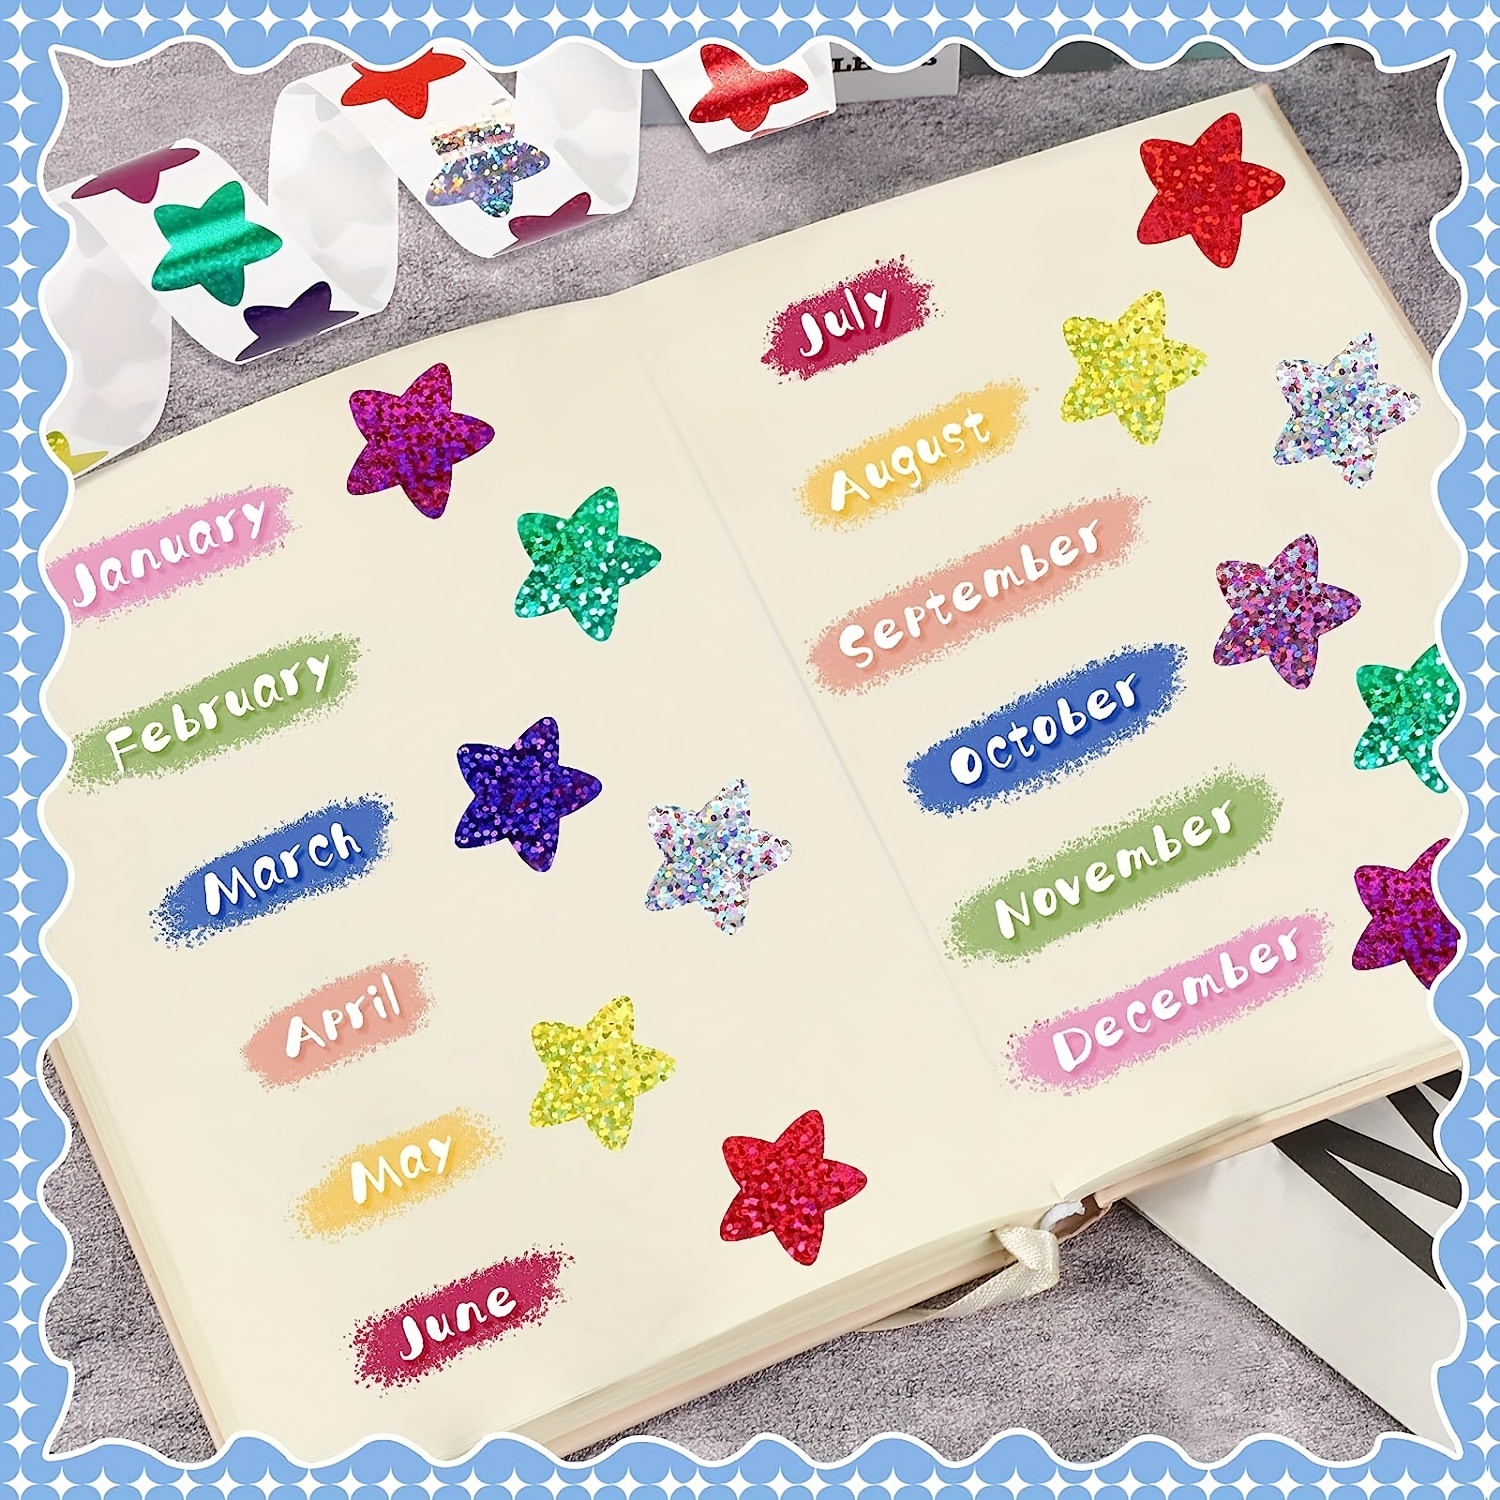  Small Star Stickers,1620 PCS Rainbow Star Stickers for Kids  Reward, 9 Colors Foil Star Stickers, 30 Sheets Small Star Sticker for  School Planner, Behavior Chart, Classroom Teacher Supplies, DIY : Office  Products